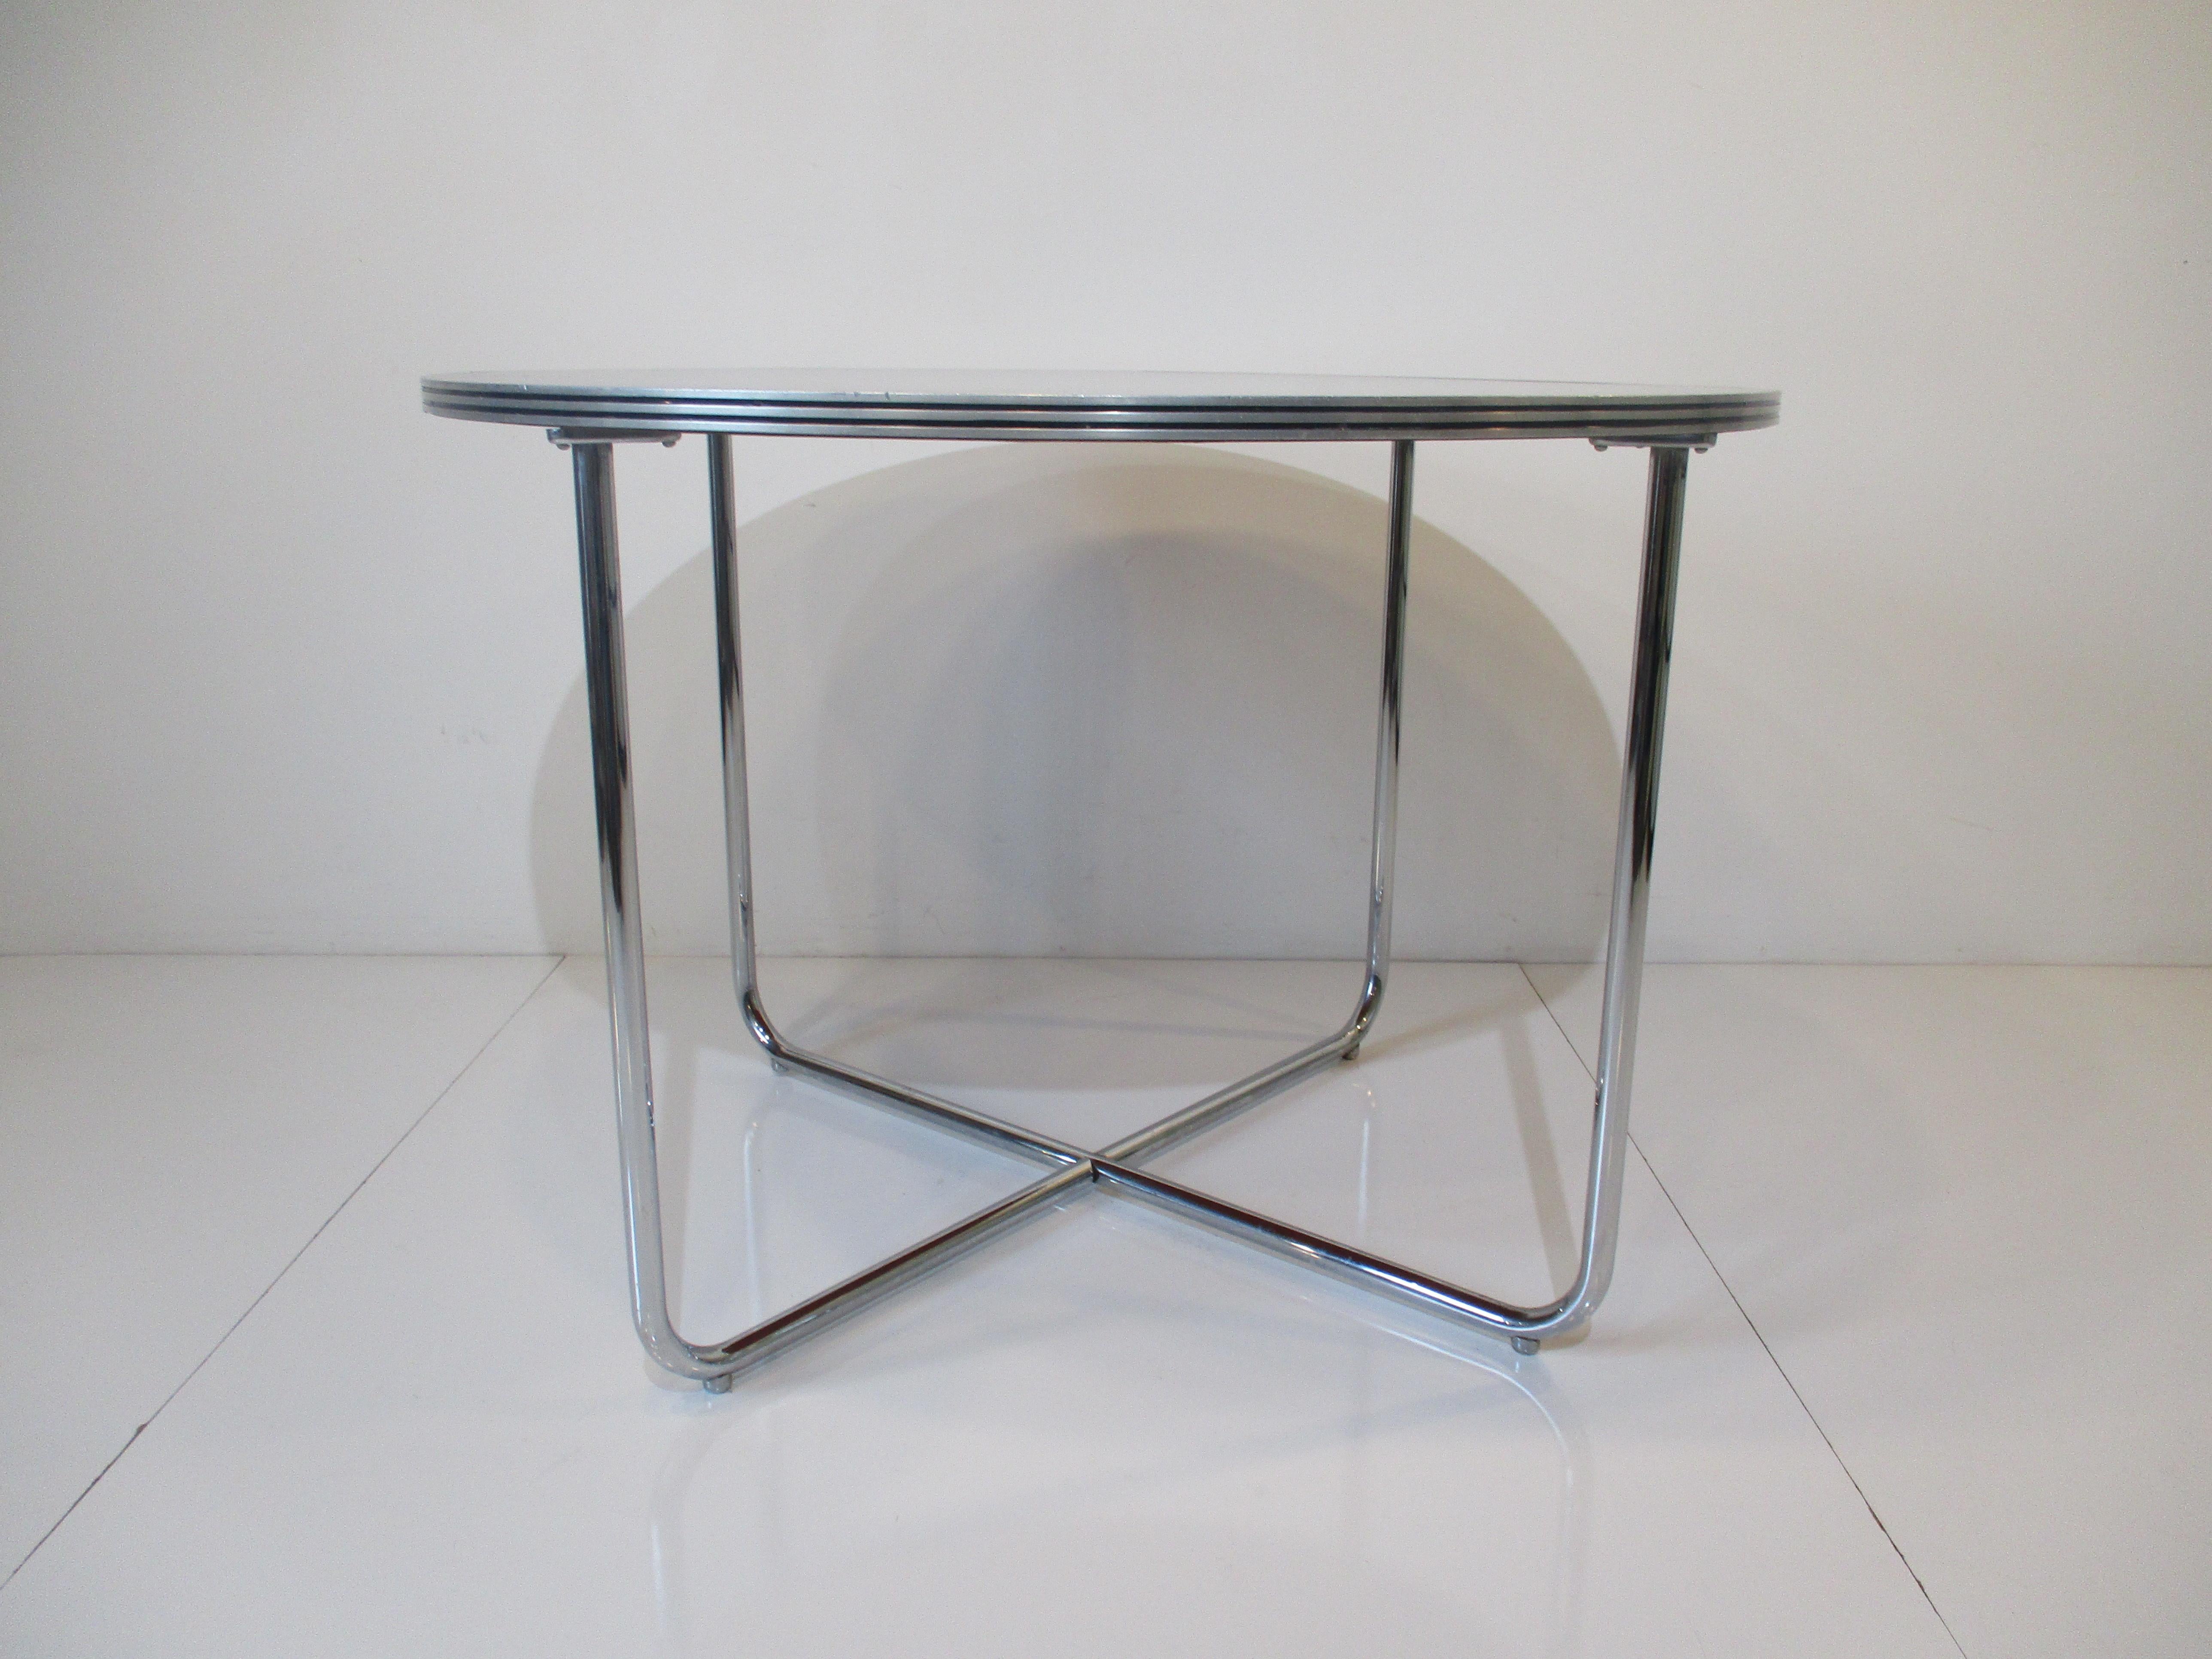 A chromed tubed X based dining table designed by the iconic Gilbert Rohde with triple banded aluminum edge and black permite Laminate top. A very well crafted piece from the Art Deco machine age period but can work with many interiors with it's